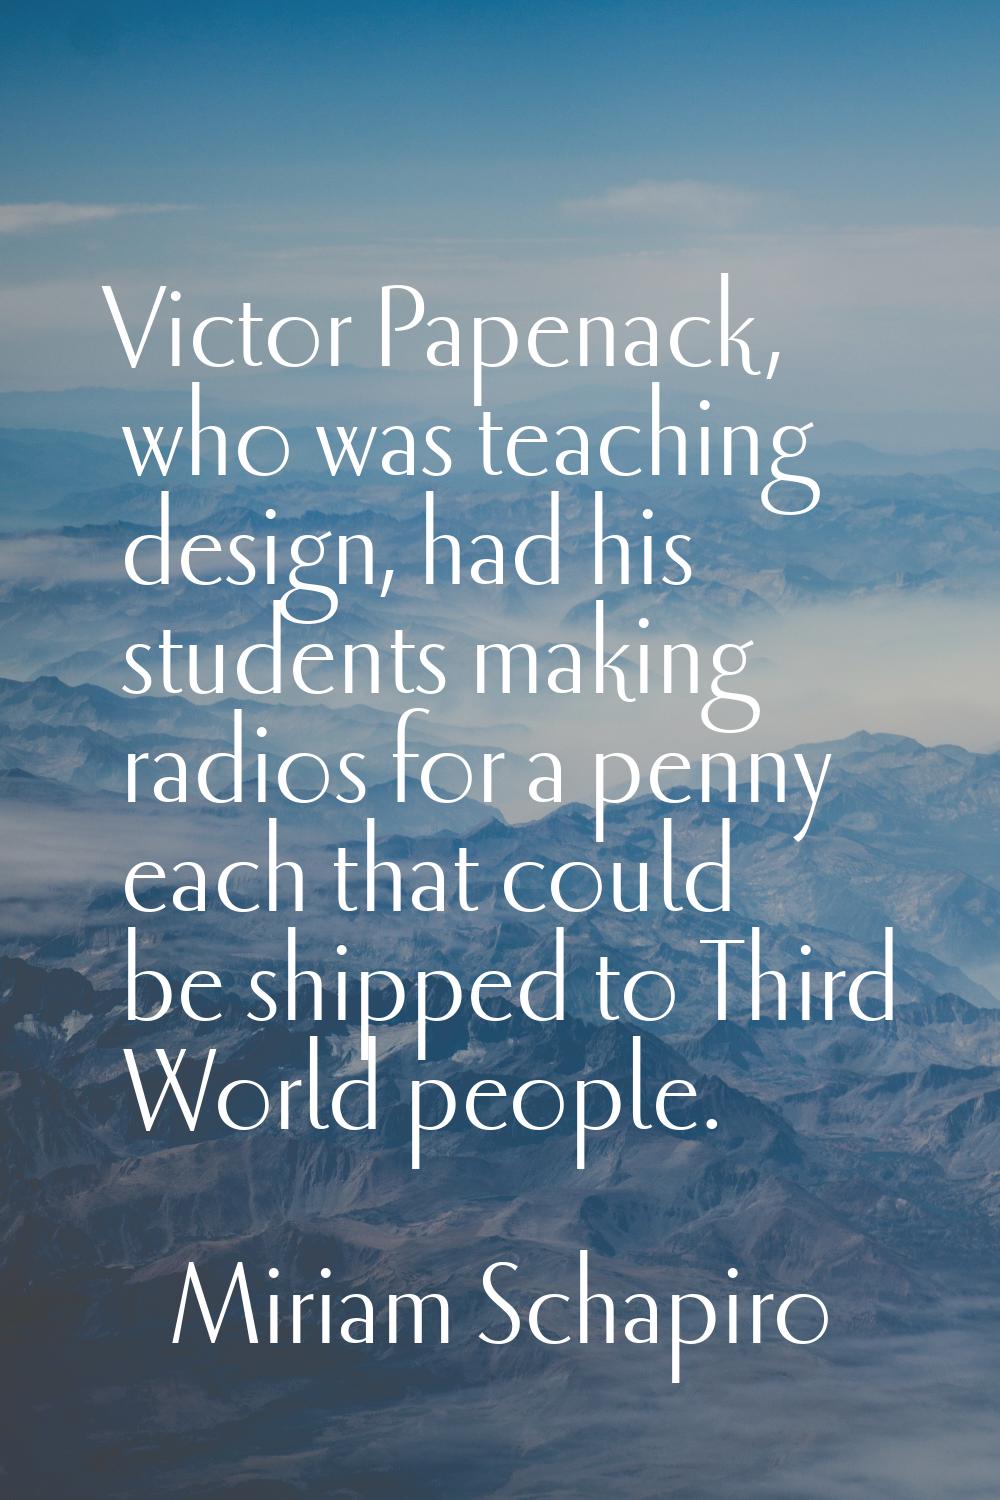 Victor Papenack, who was teaching design, had his students making radios for a penny each that coul